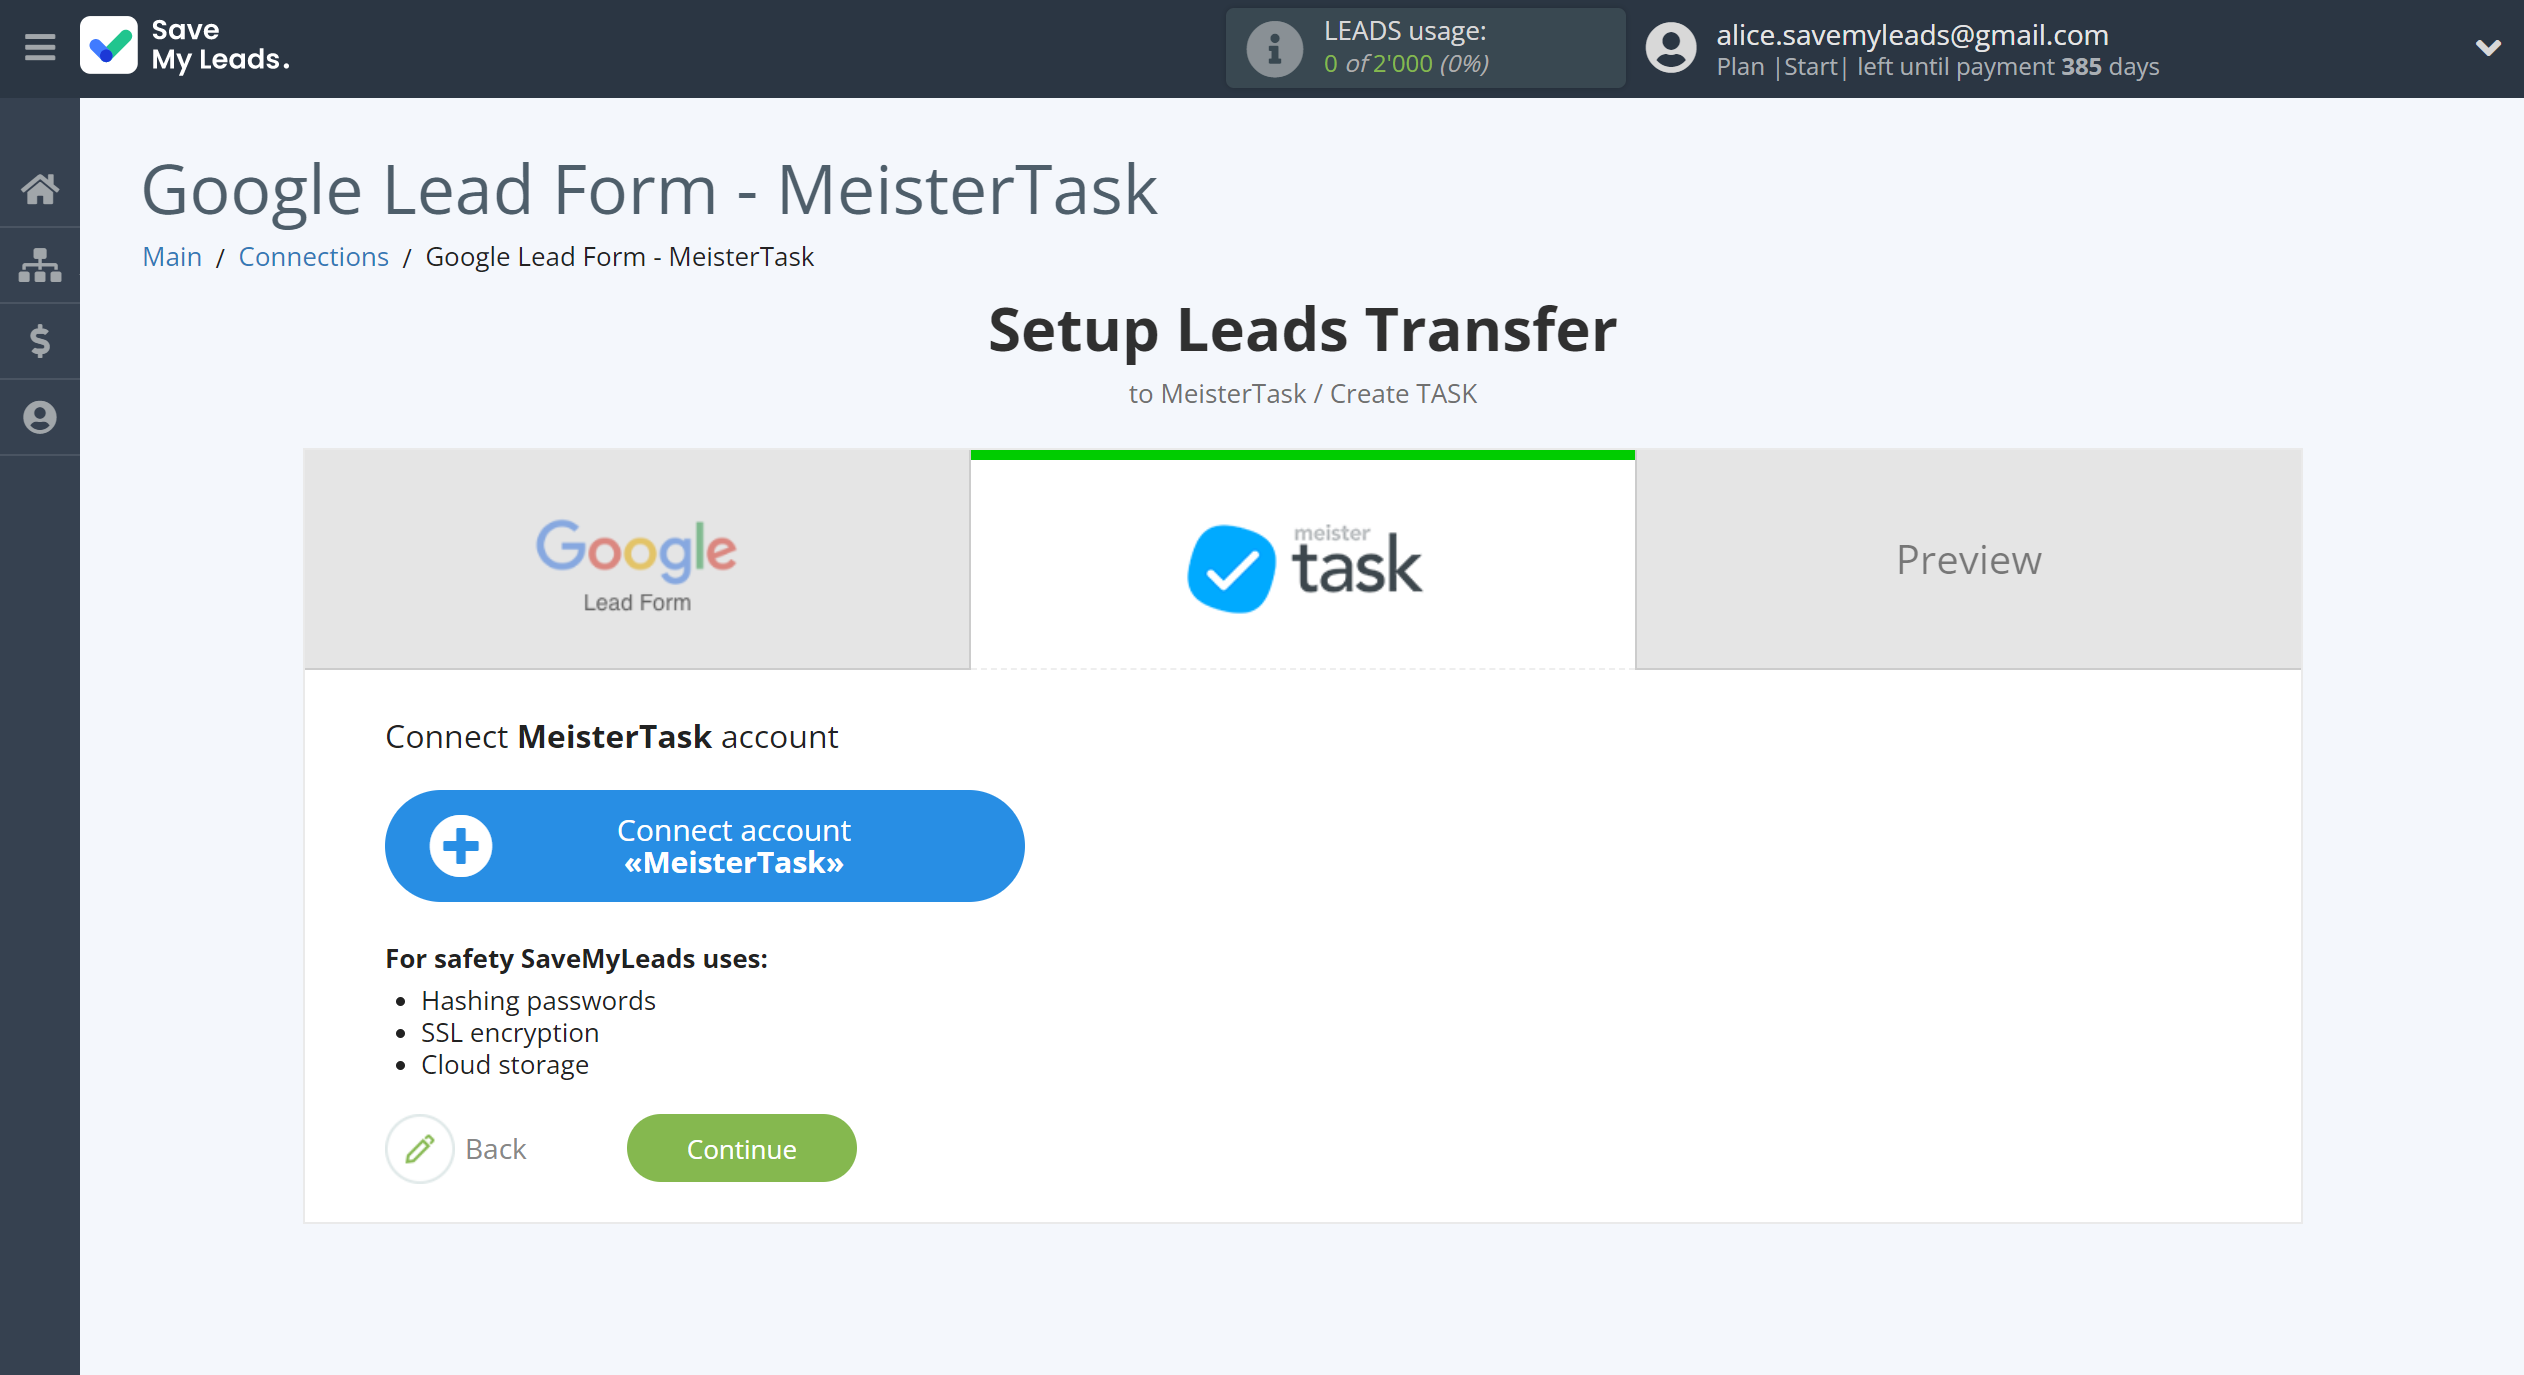 How to Connect Google Lead Form with MeisterTask | Data Destination account connection